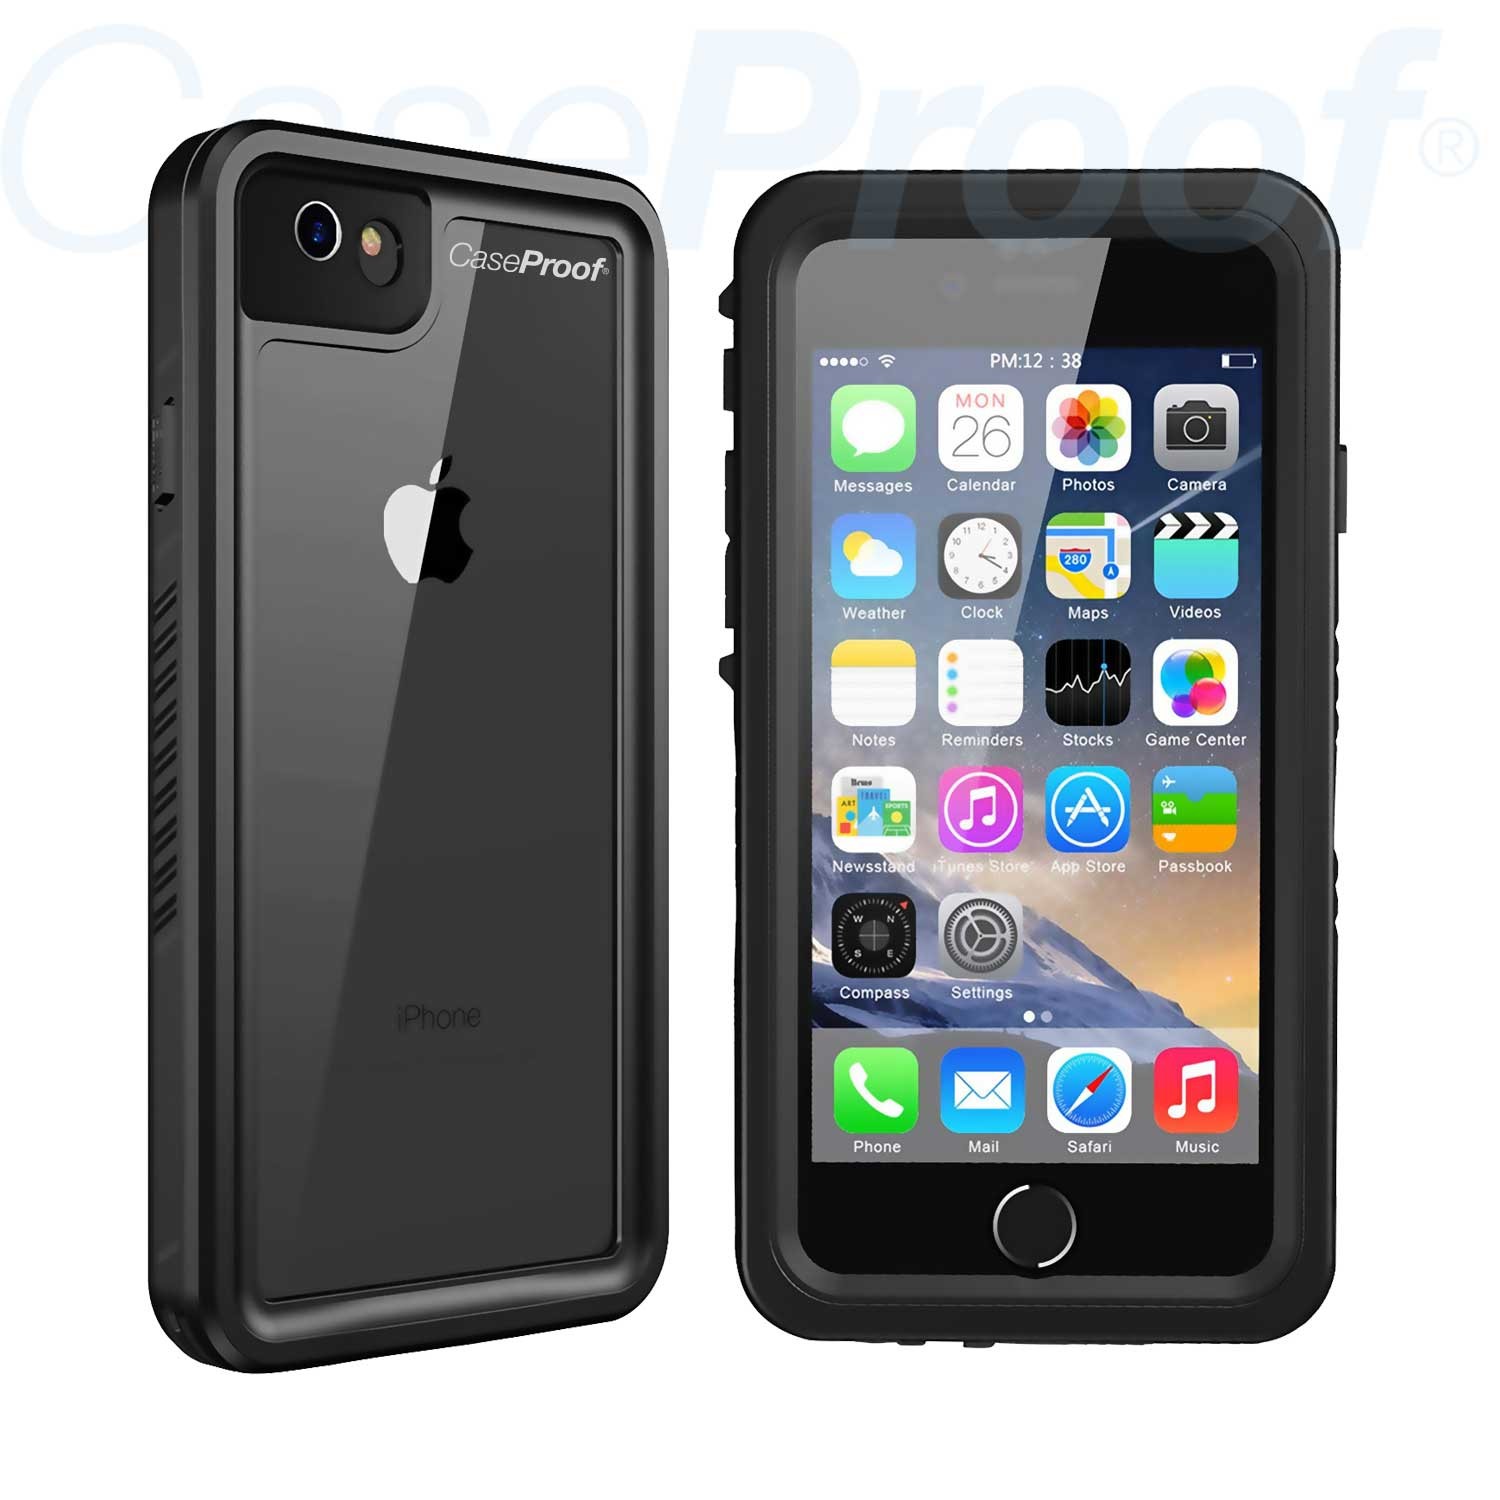 Waterproof & Shockproof for iPhone 6/6s - optimal protection